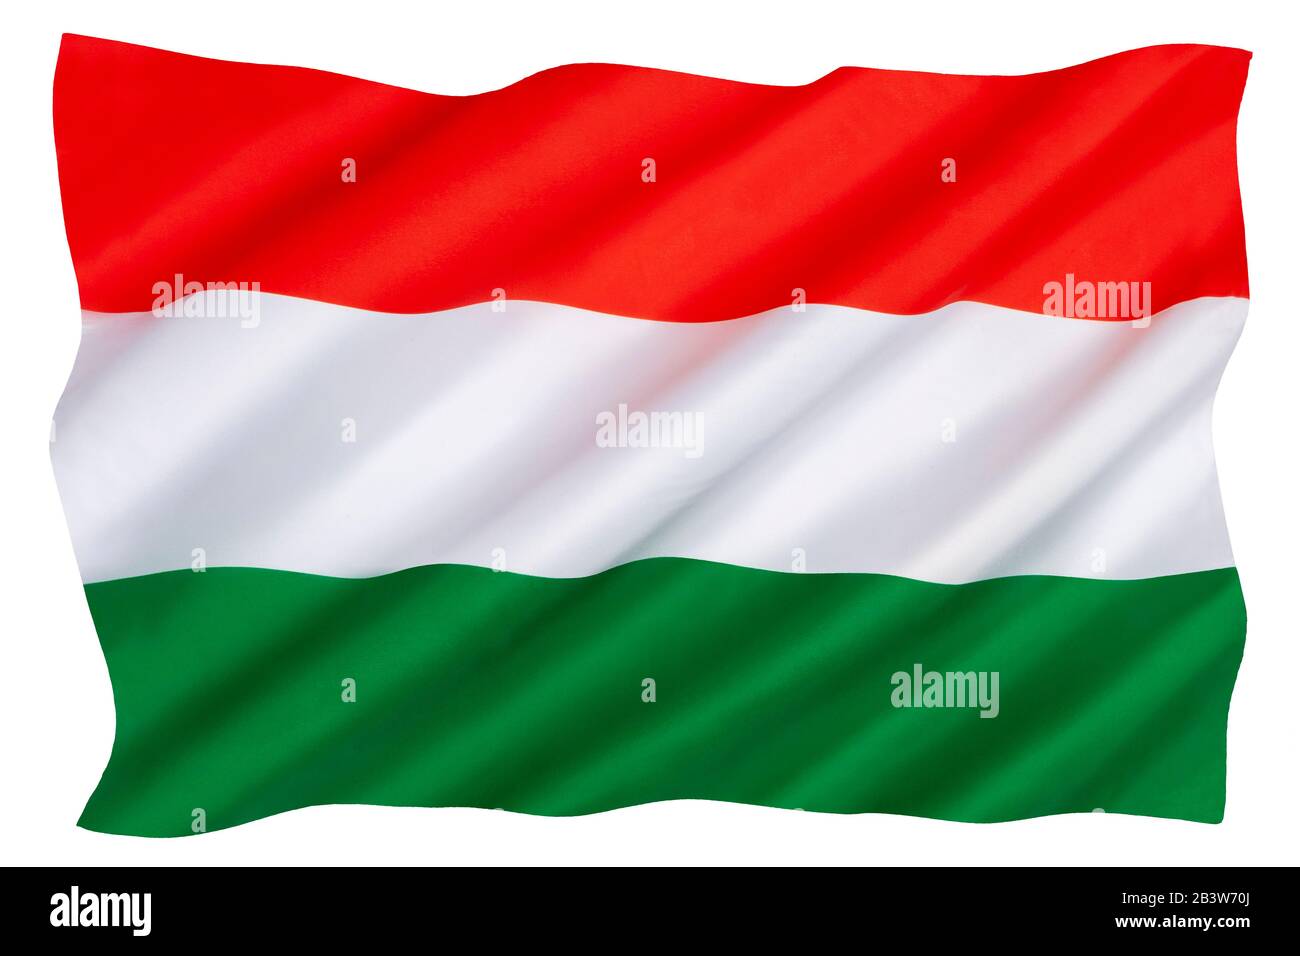 The civil and state flag of Hungary Stock Photo